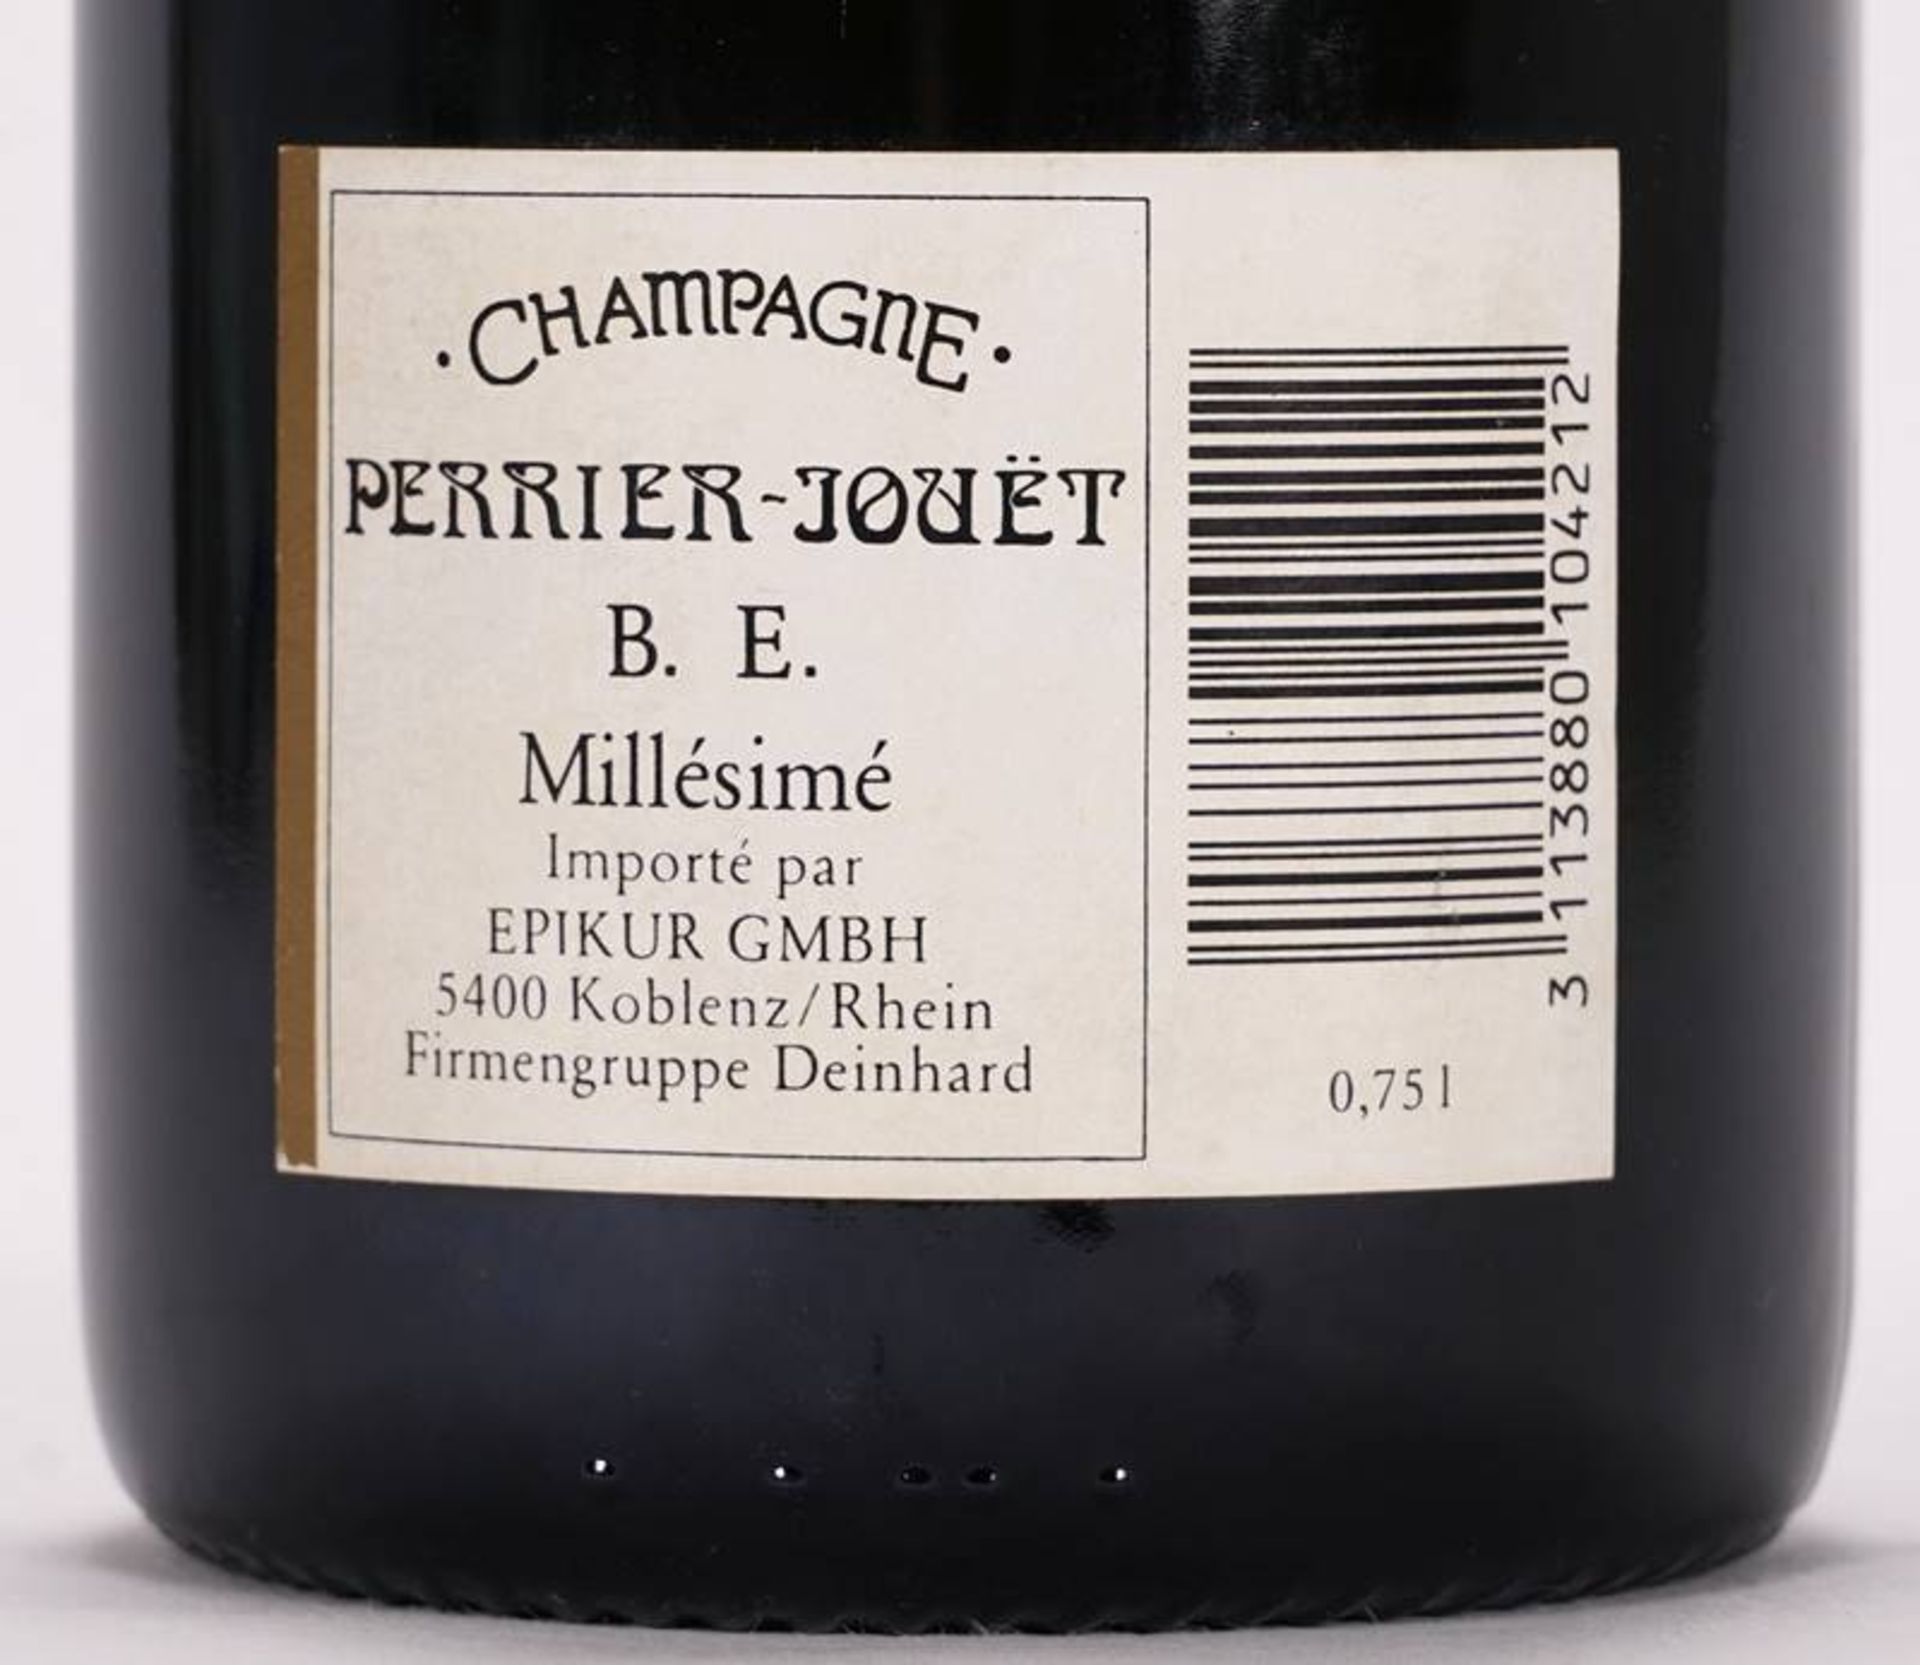 1 bottle Perrier-Jouet Champagne - Image 5 of 5